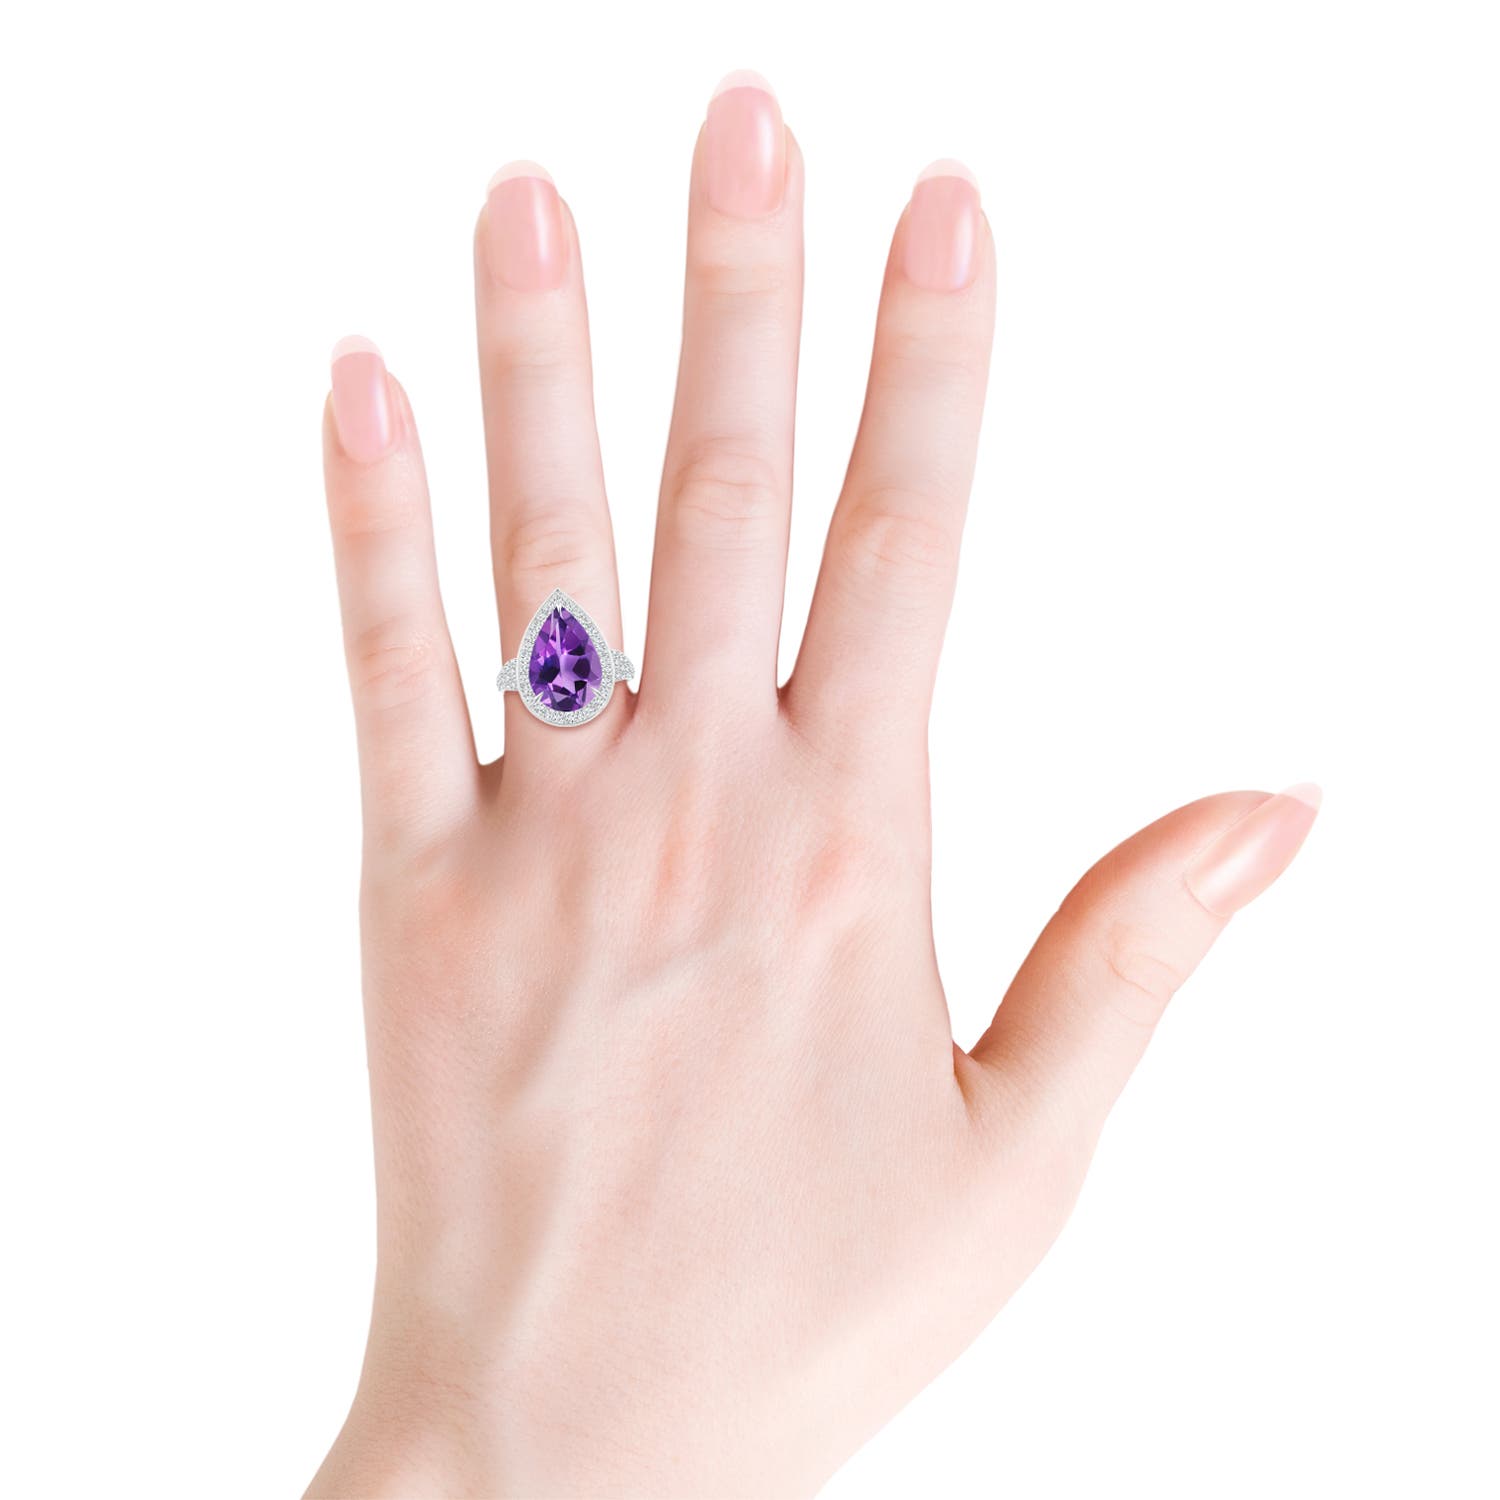 AAA - Amethyst / 5.48 CT / 14 KT White Gold